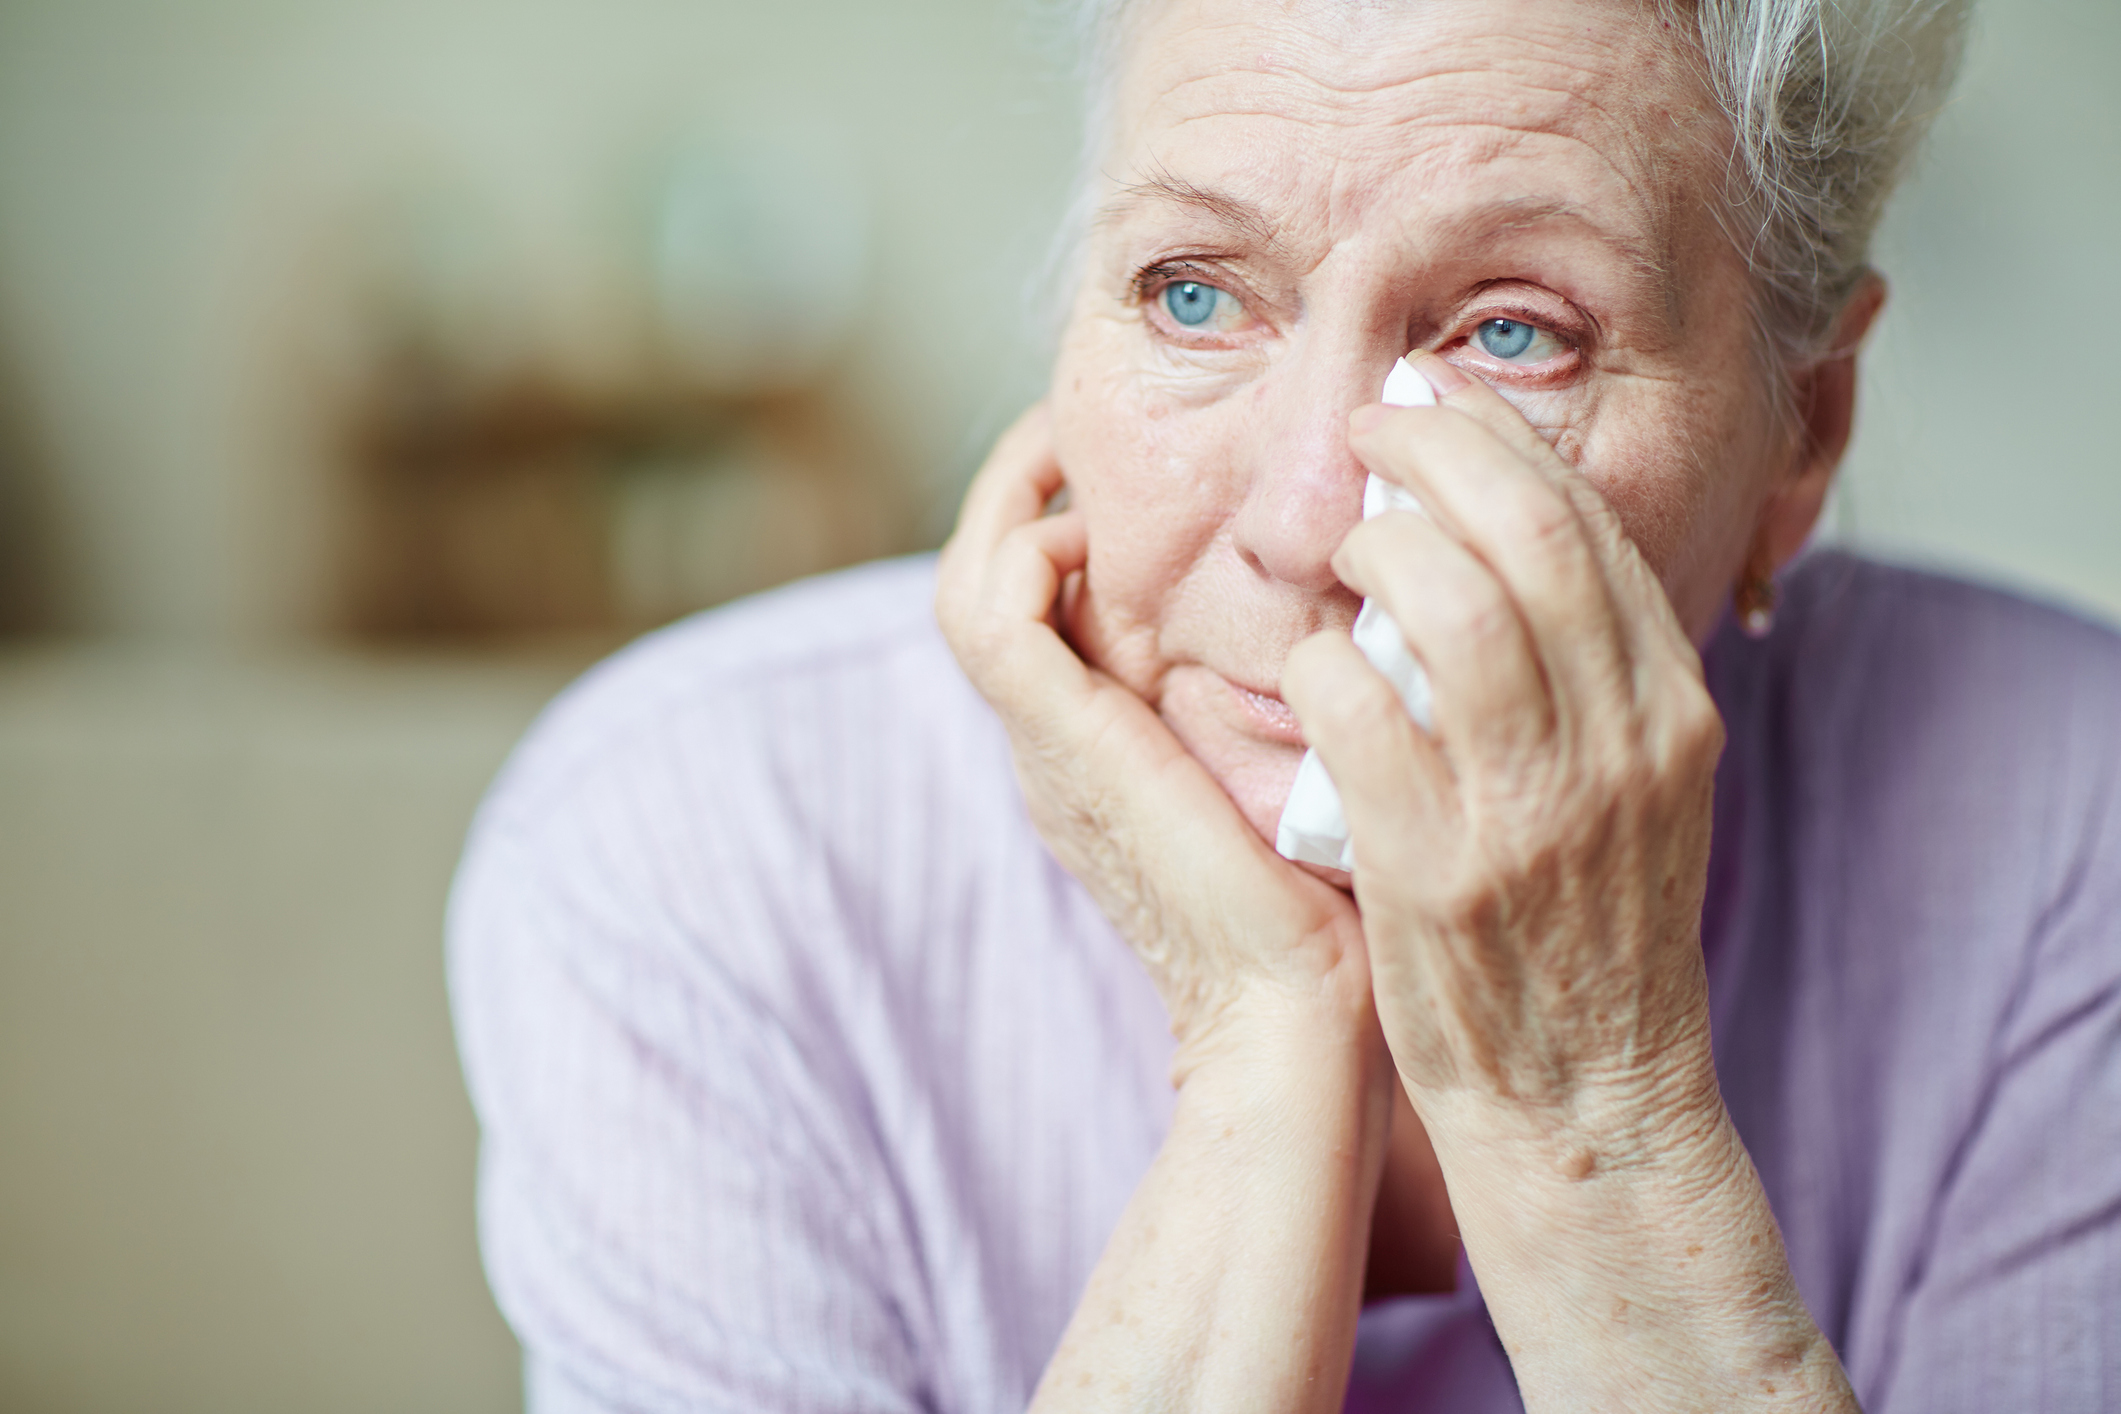 A crying older woman | Source: Getty Images